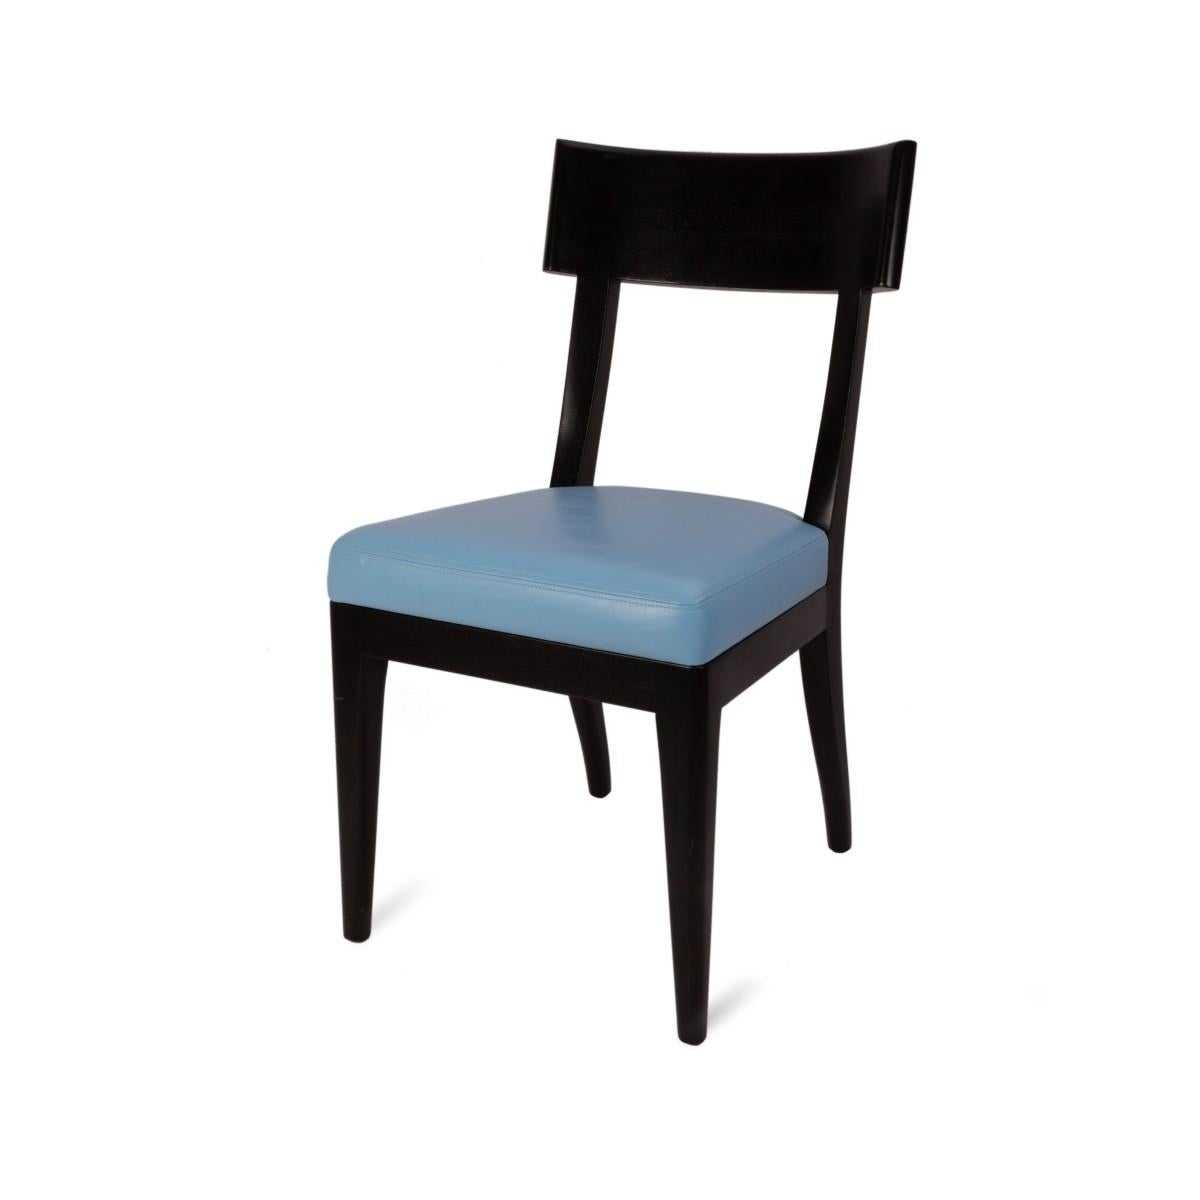 Set of five (5) Terra dining chairs by Christian Liaigre for Holly Hunt in a pale blue leather and dark brown finish. 

Some wear to frames and upholstery,

Measure: Seat height 18 inches.